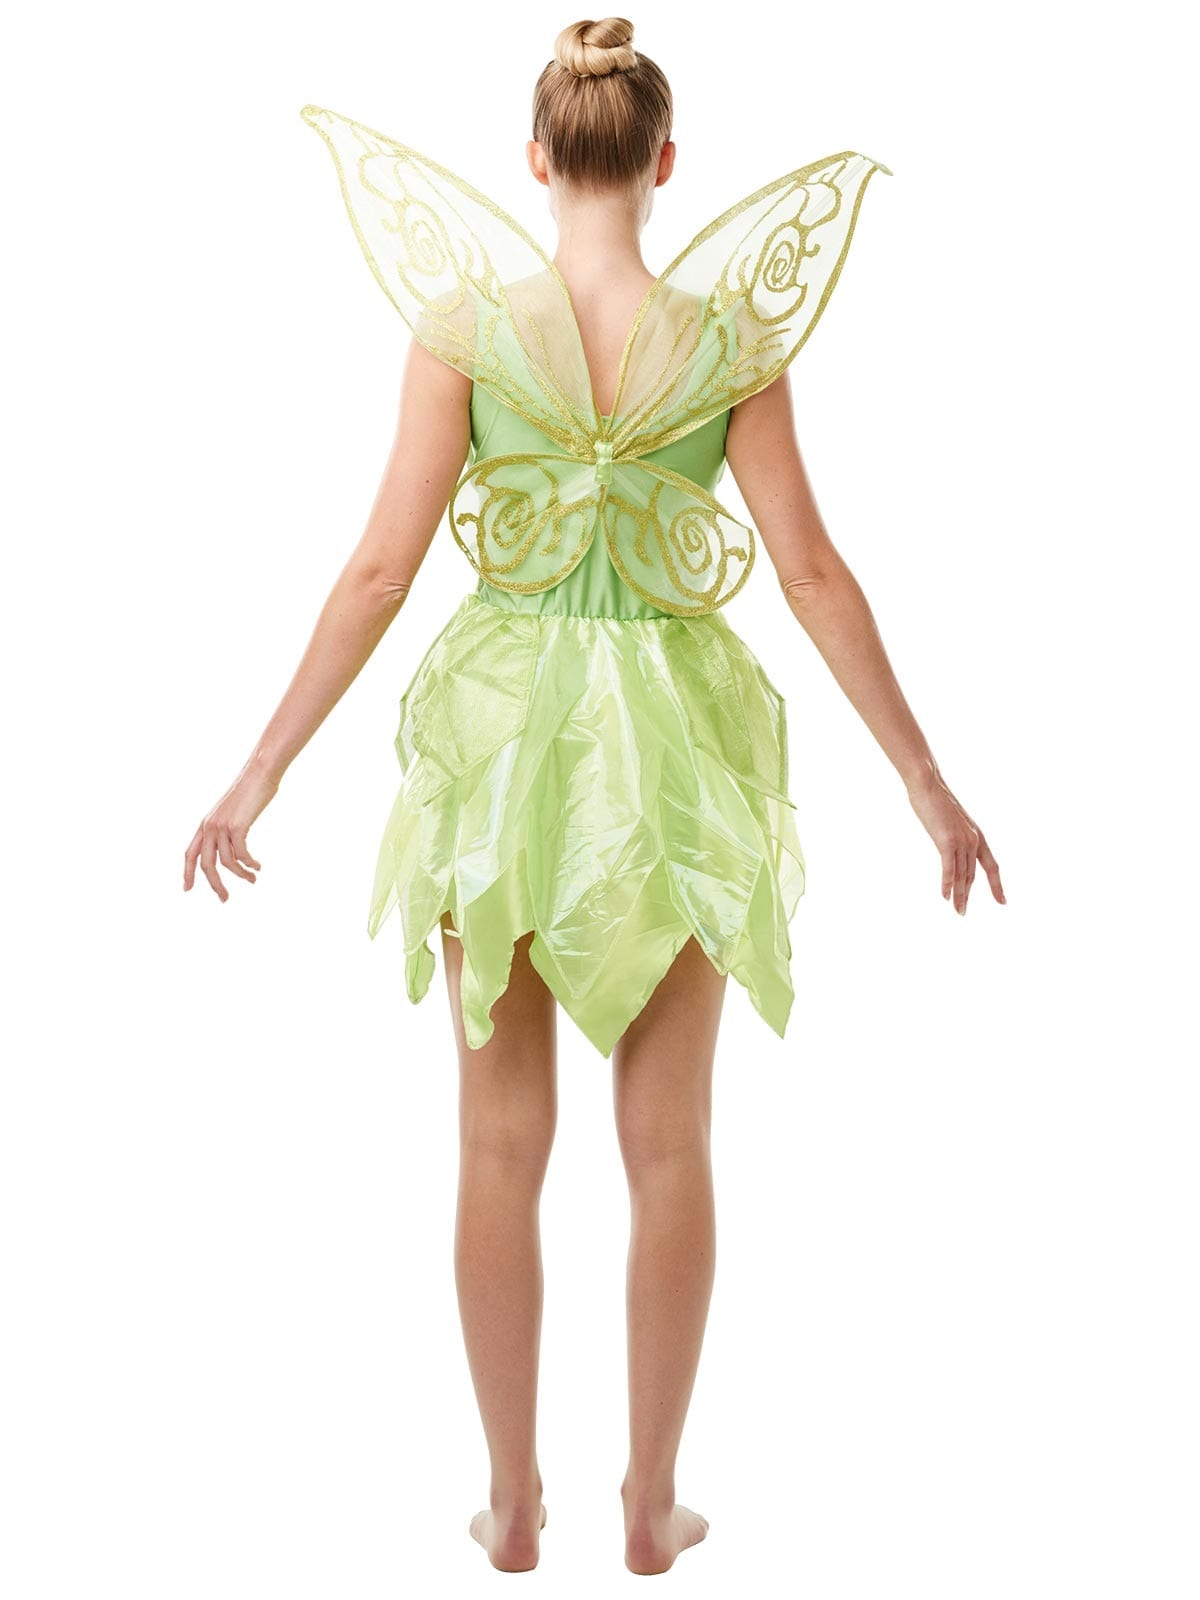 Tinker Bell Deluxe Costume Adult The Costumery